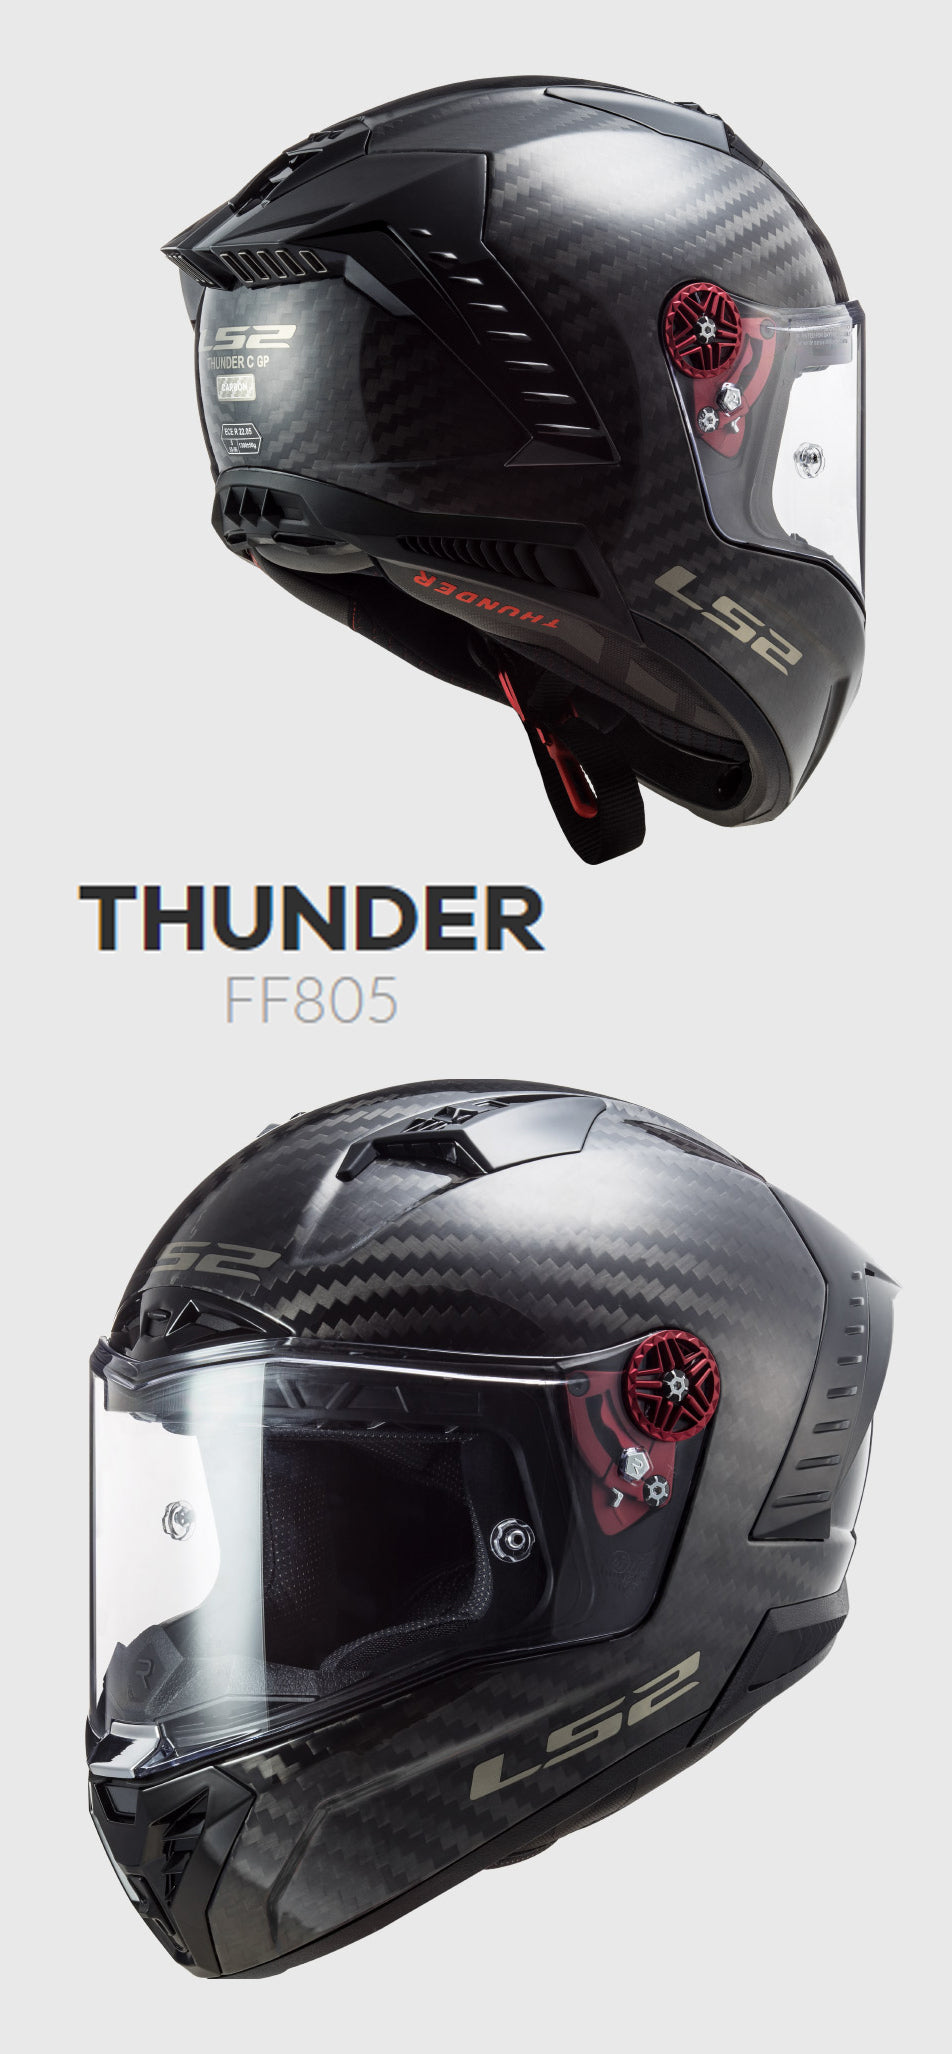 LS2 Motorcycle Helmets 2021 | Introducing the Thunder FF805 Street Race Collection